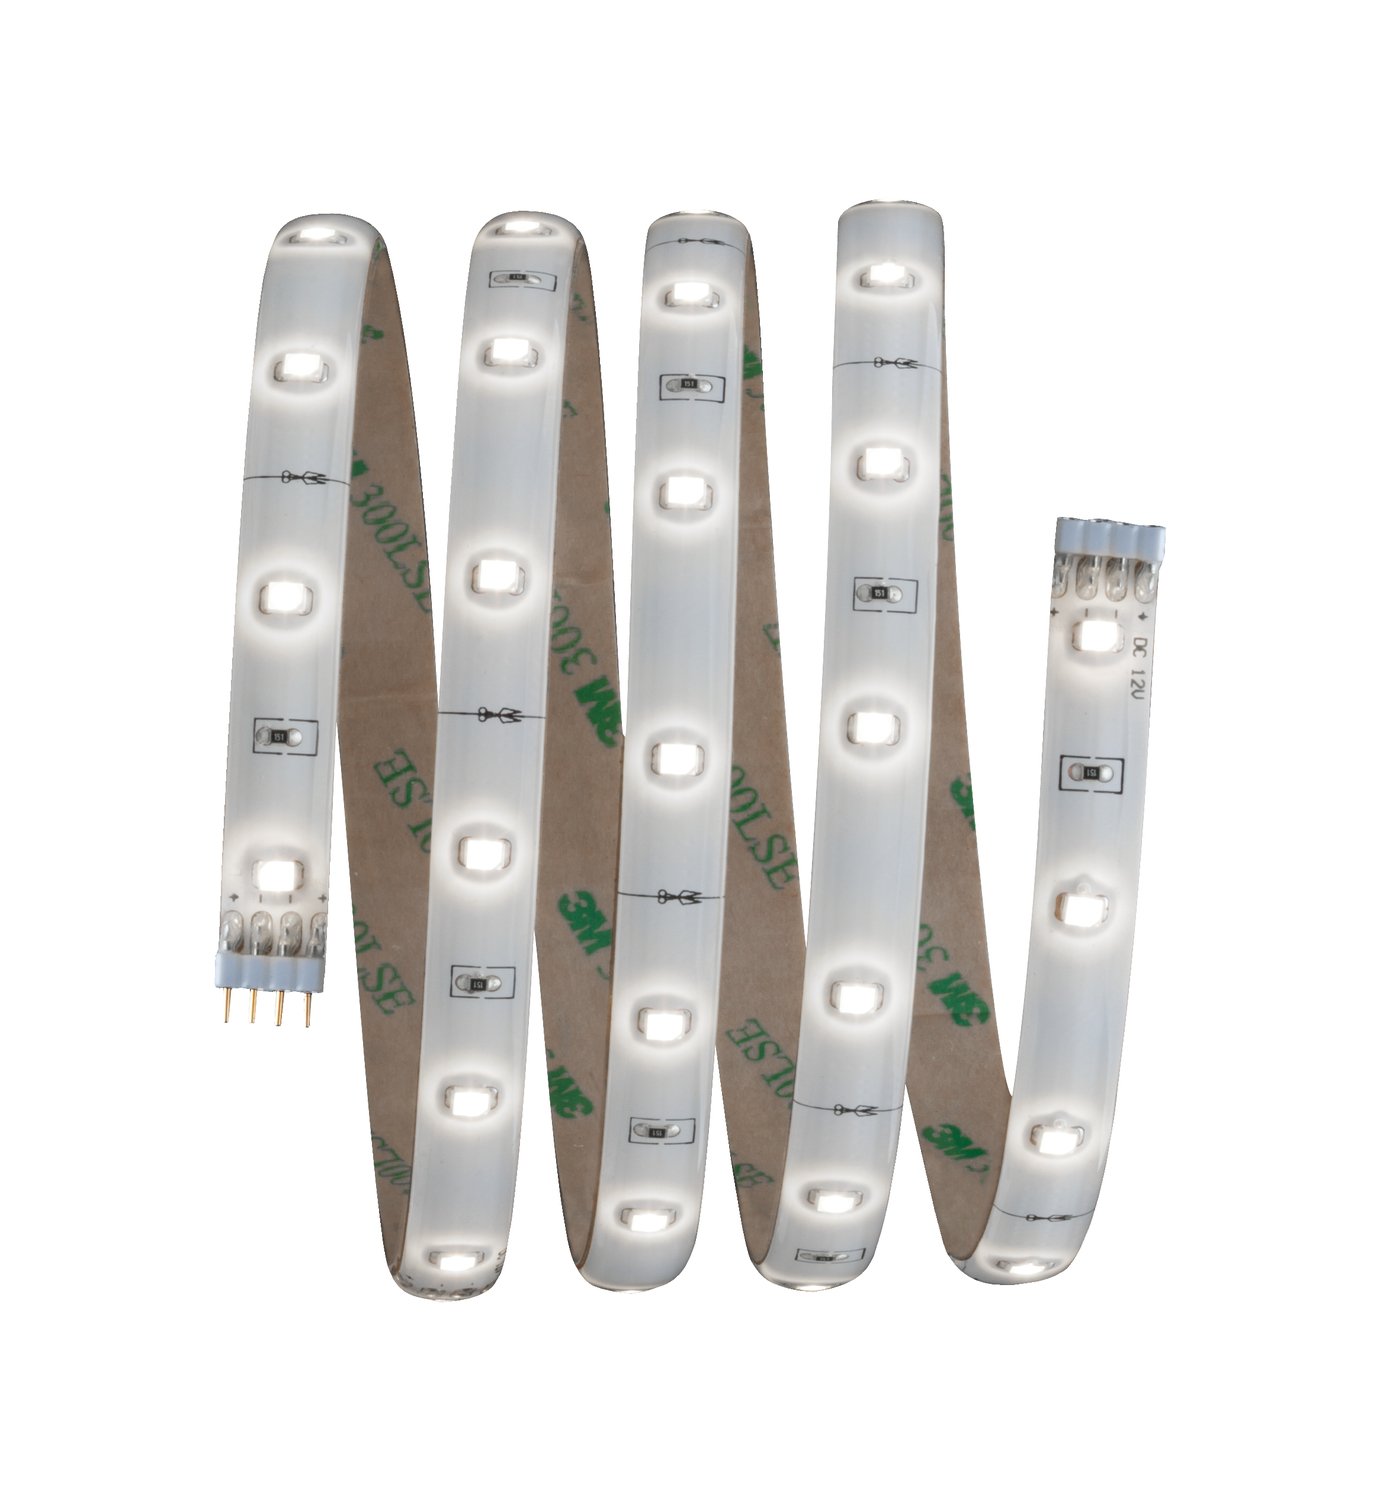 YourLED LED Strip Daylight white 1,5m protect cover 4,5W 270lm/m 6500K 12VA